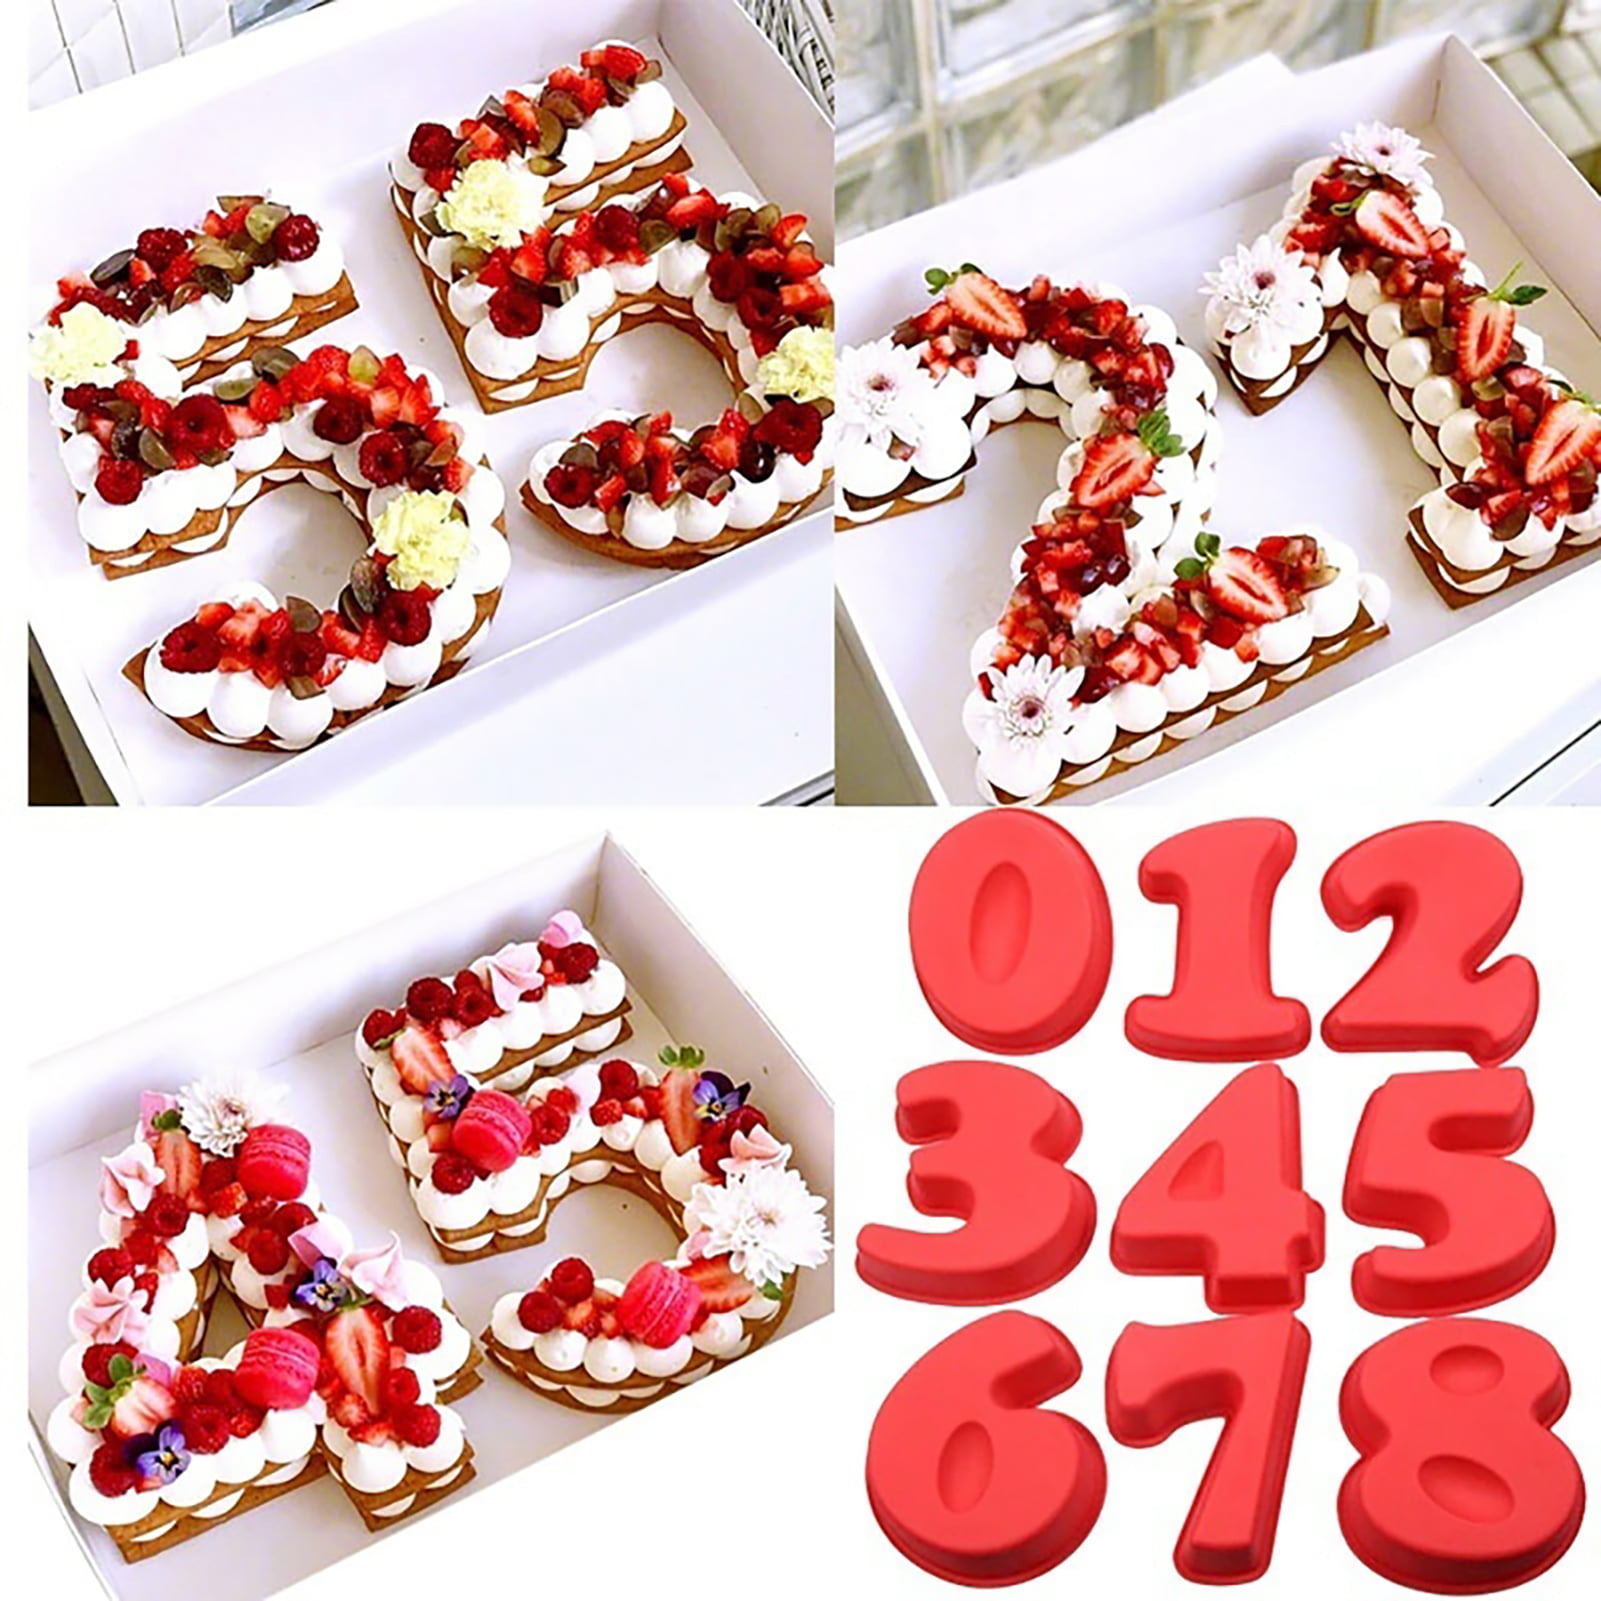 PARTYON Large 3D Numbers Cake Molds Silicone Baking Pans for Birthday and  Anniversary, Liquid Silicone Baking Molds Numbers for Cakes BPA Free,  Number